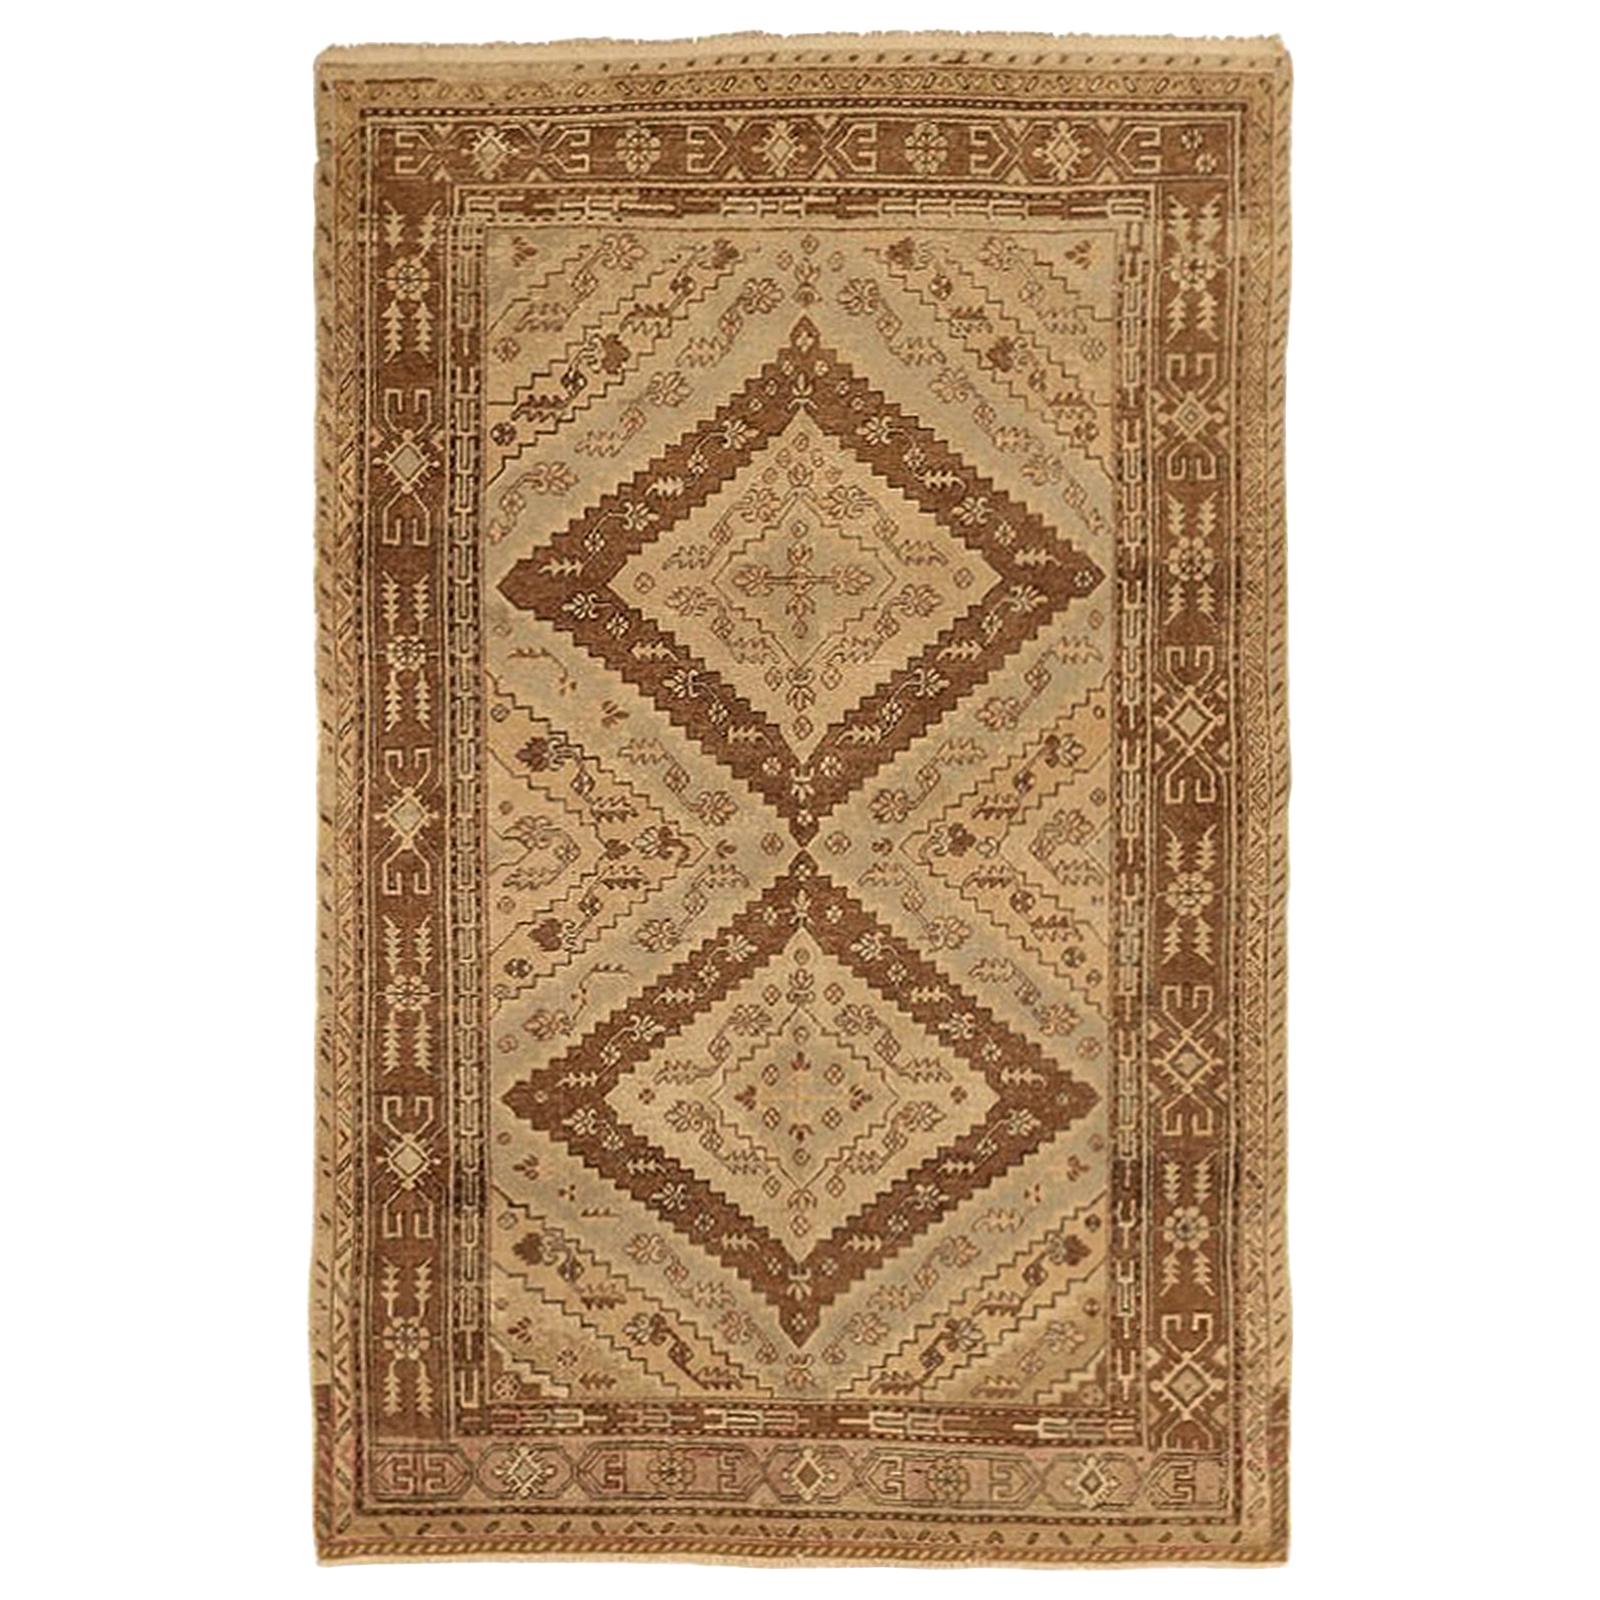  Antique Russian Khotan Rug with Brown Diamond Details on Beige Field For Sale